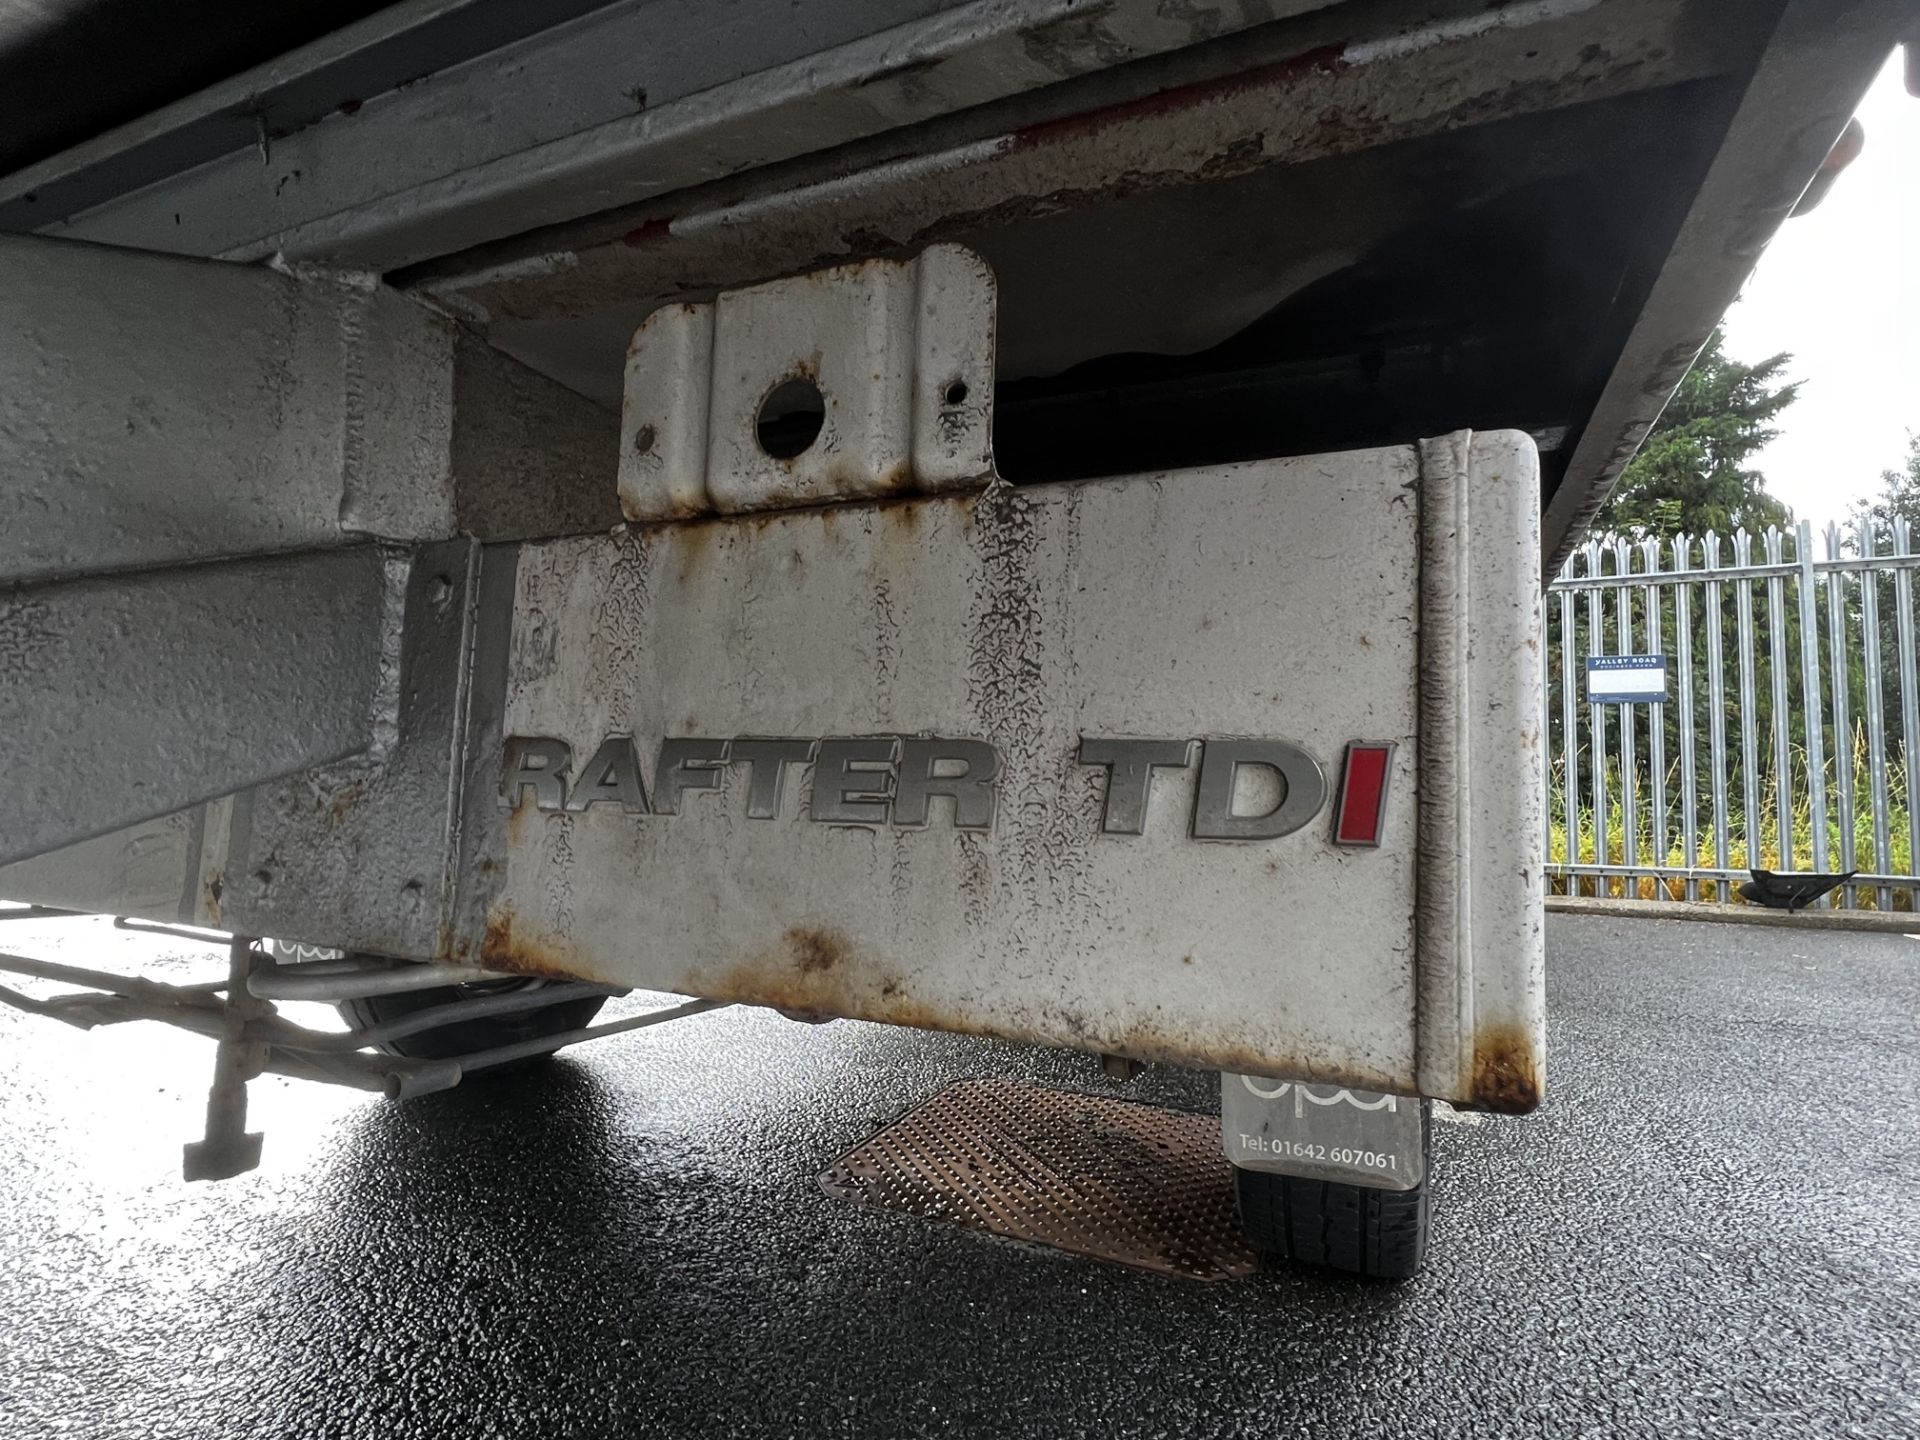 VW Crafter Custom flatbed 16.11 HL, reg no. ND64 JWA (2014), mileage 100,239, winch to include ramps - Image 5 of 11